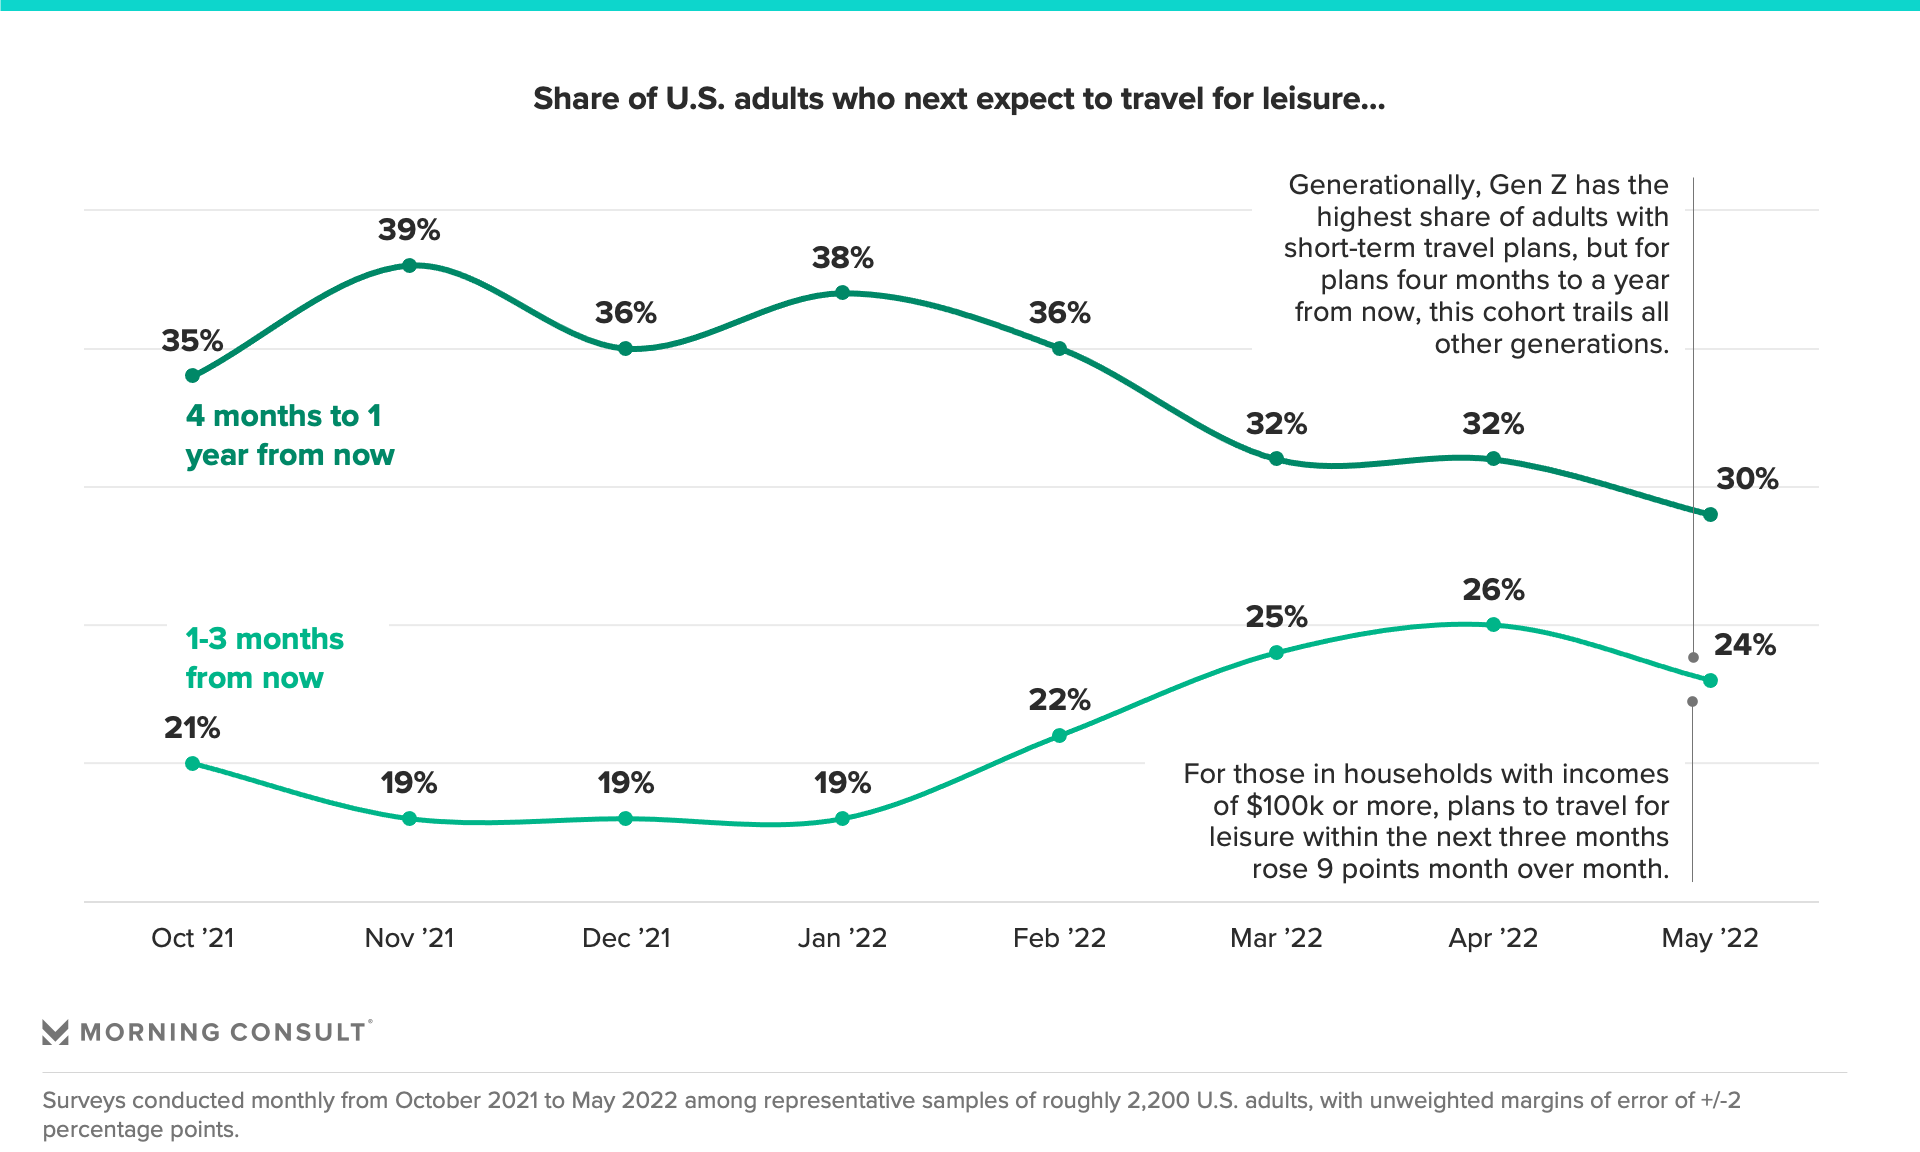 Trend line chart showing the share of U.S. adults who next expect to travel for leisure, 2021-2022